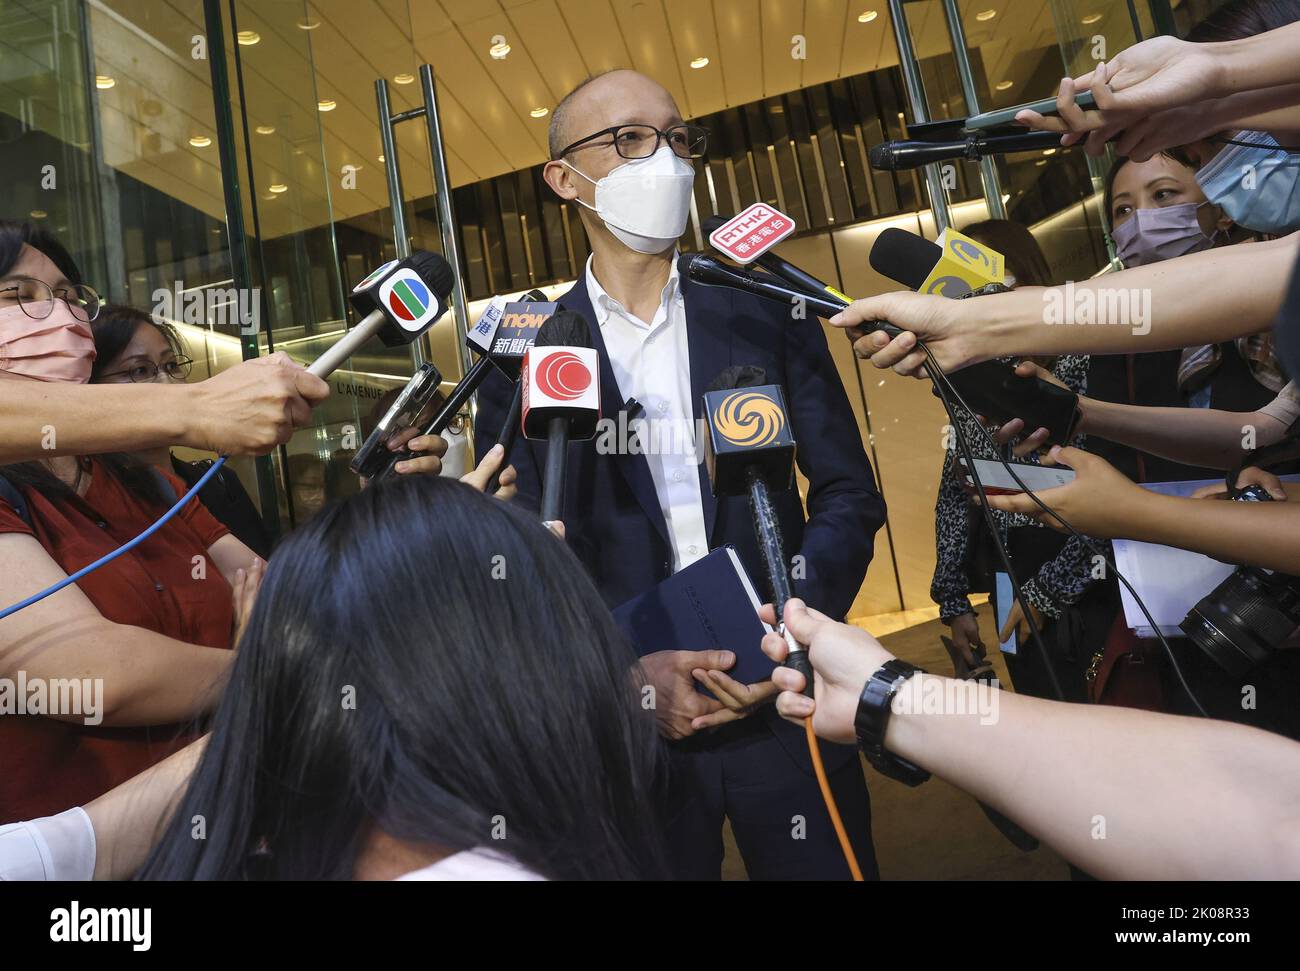 Tung Wah Group of Hospitals Wong Fut Nam College Principal Lee Ching-pong speaks to the press after his mediation meeting with student Nathan Lam Chak-chun, arranged by the Equal Opportunities Commission in Wong Chuk Hang. 08SEP22 SCMP / Jonathan Wong Stock Photo